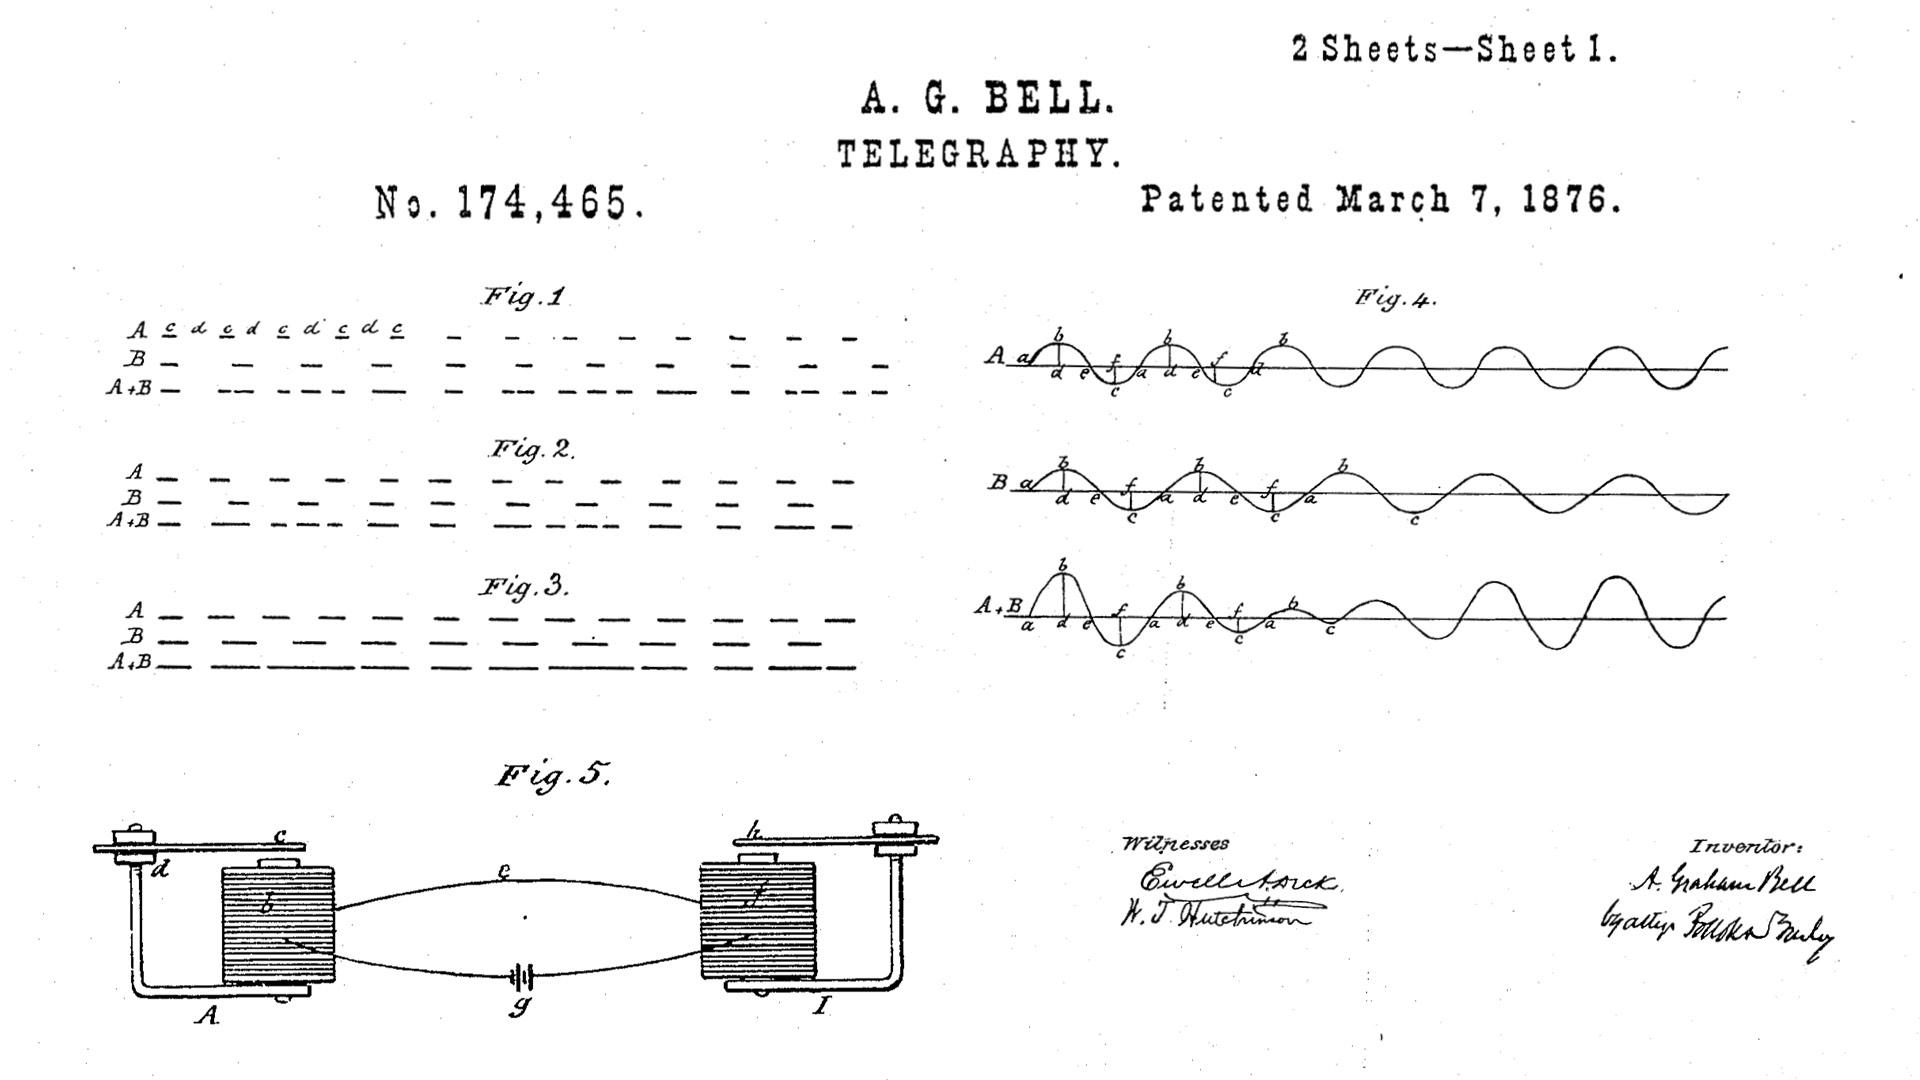 Patent document for telephone - (patented in 1876)